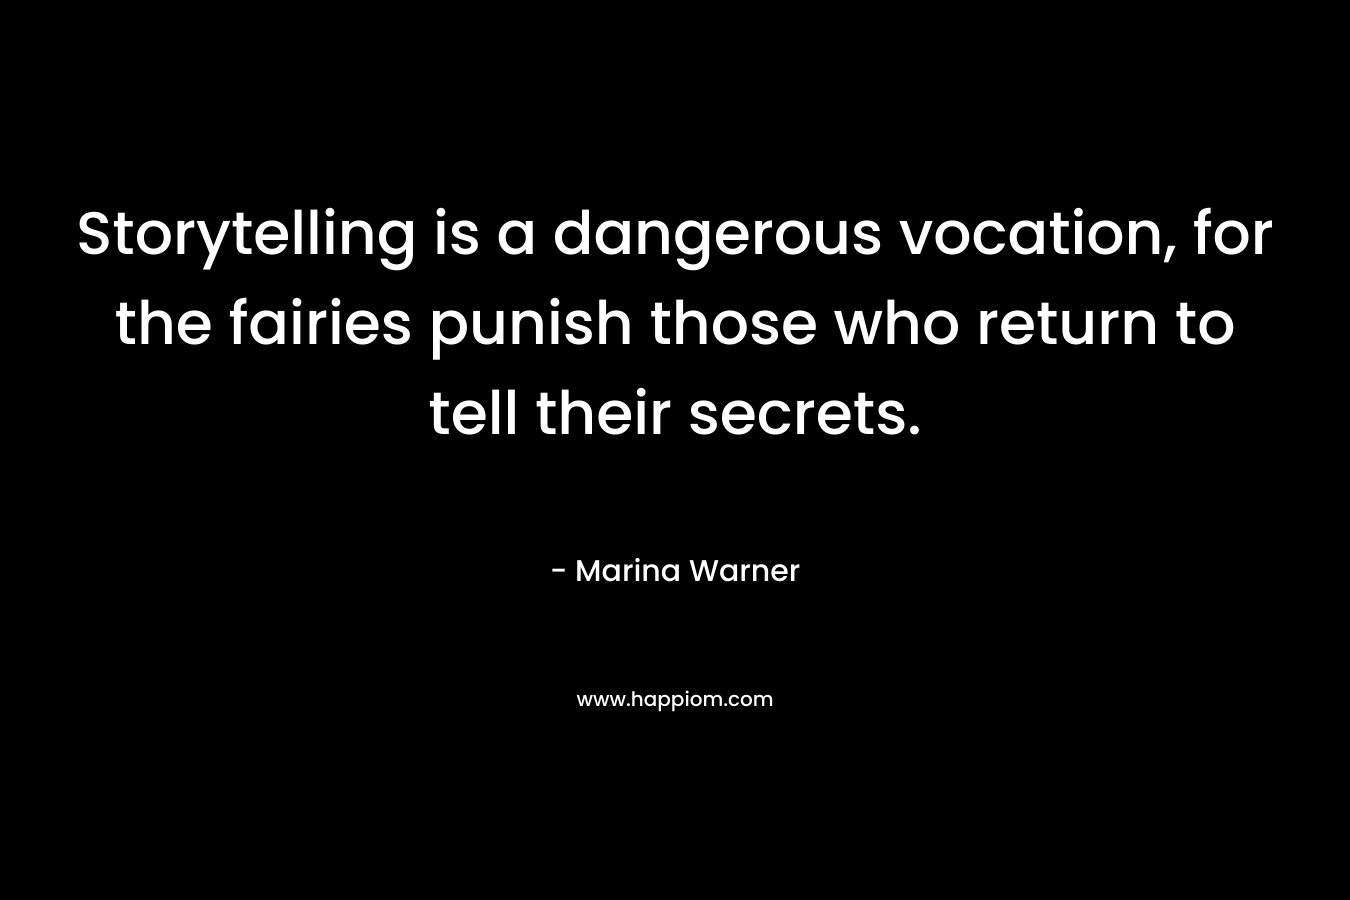 Storytelling is a dangerous vocation, for the fairies punish those who return to tell their secrets. – Marina Warner